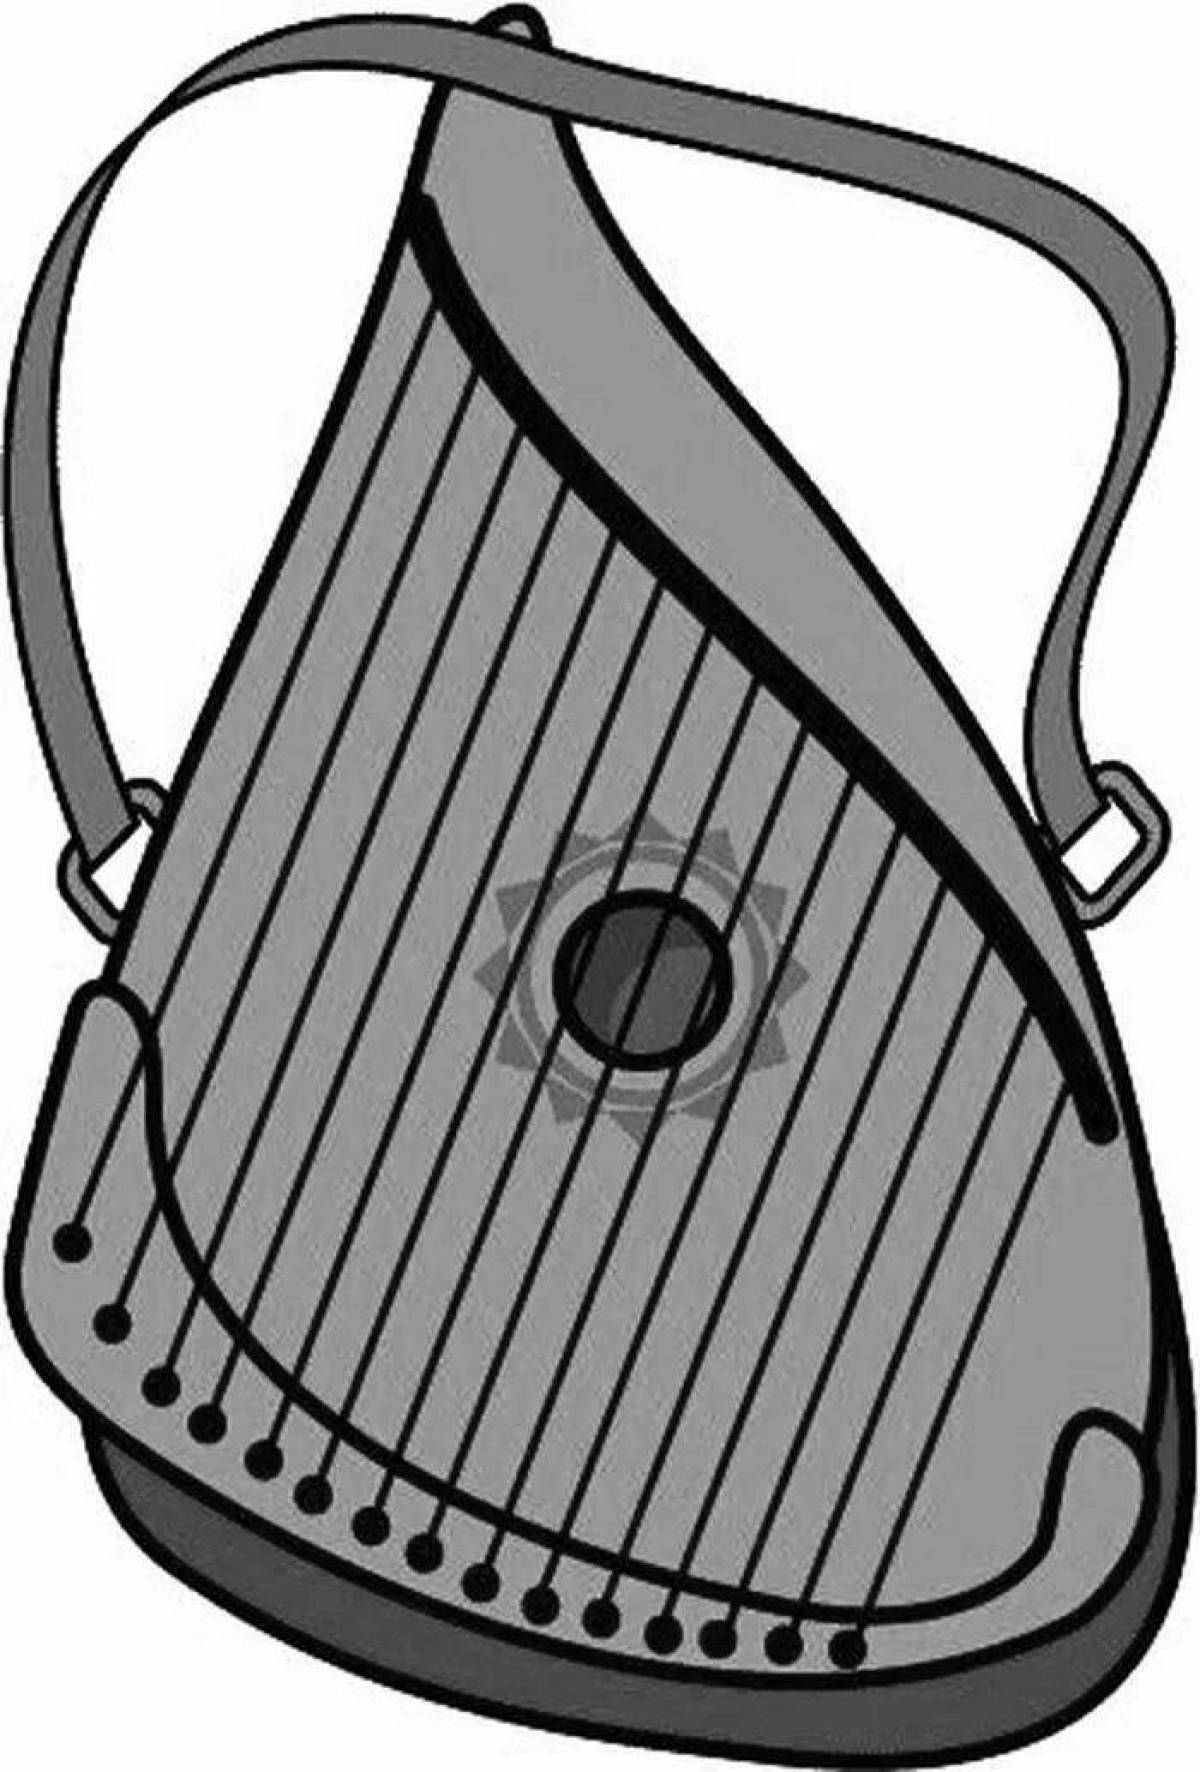 Coloring page delightful musical instrument psaltery